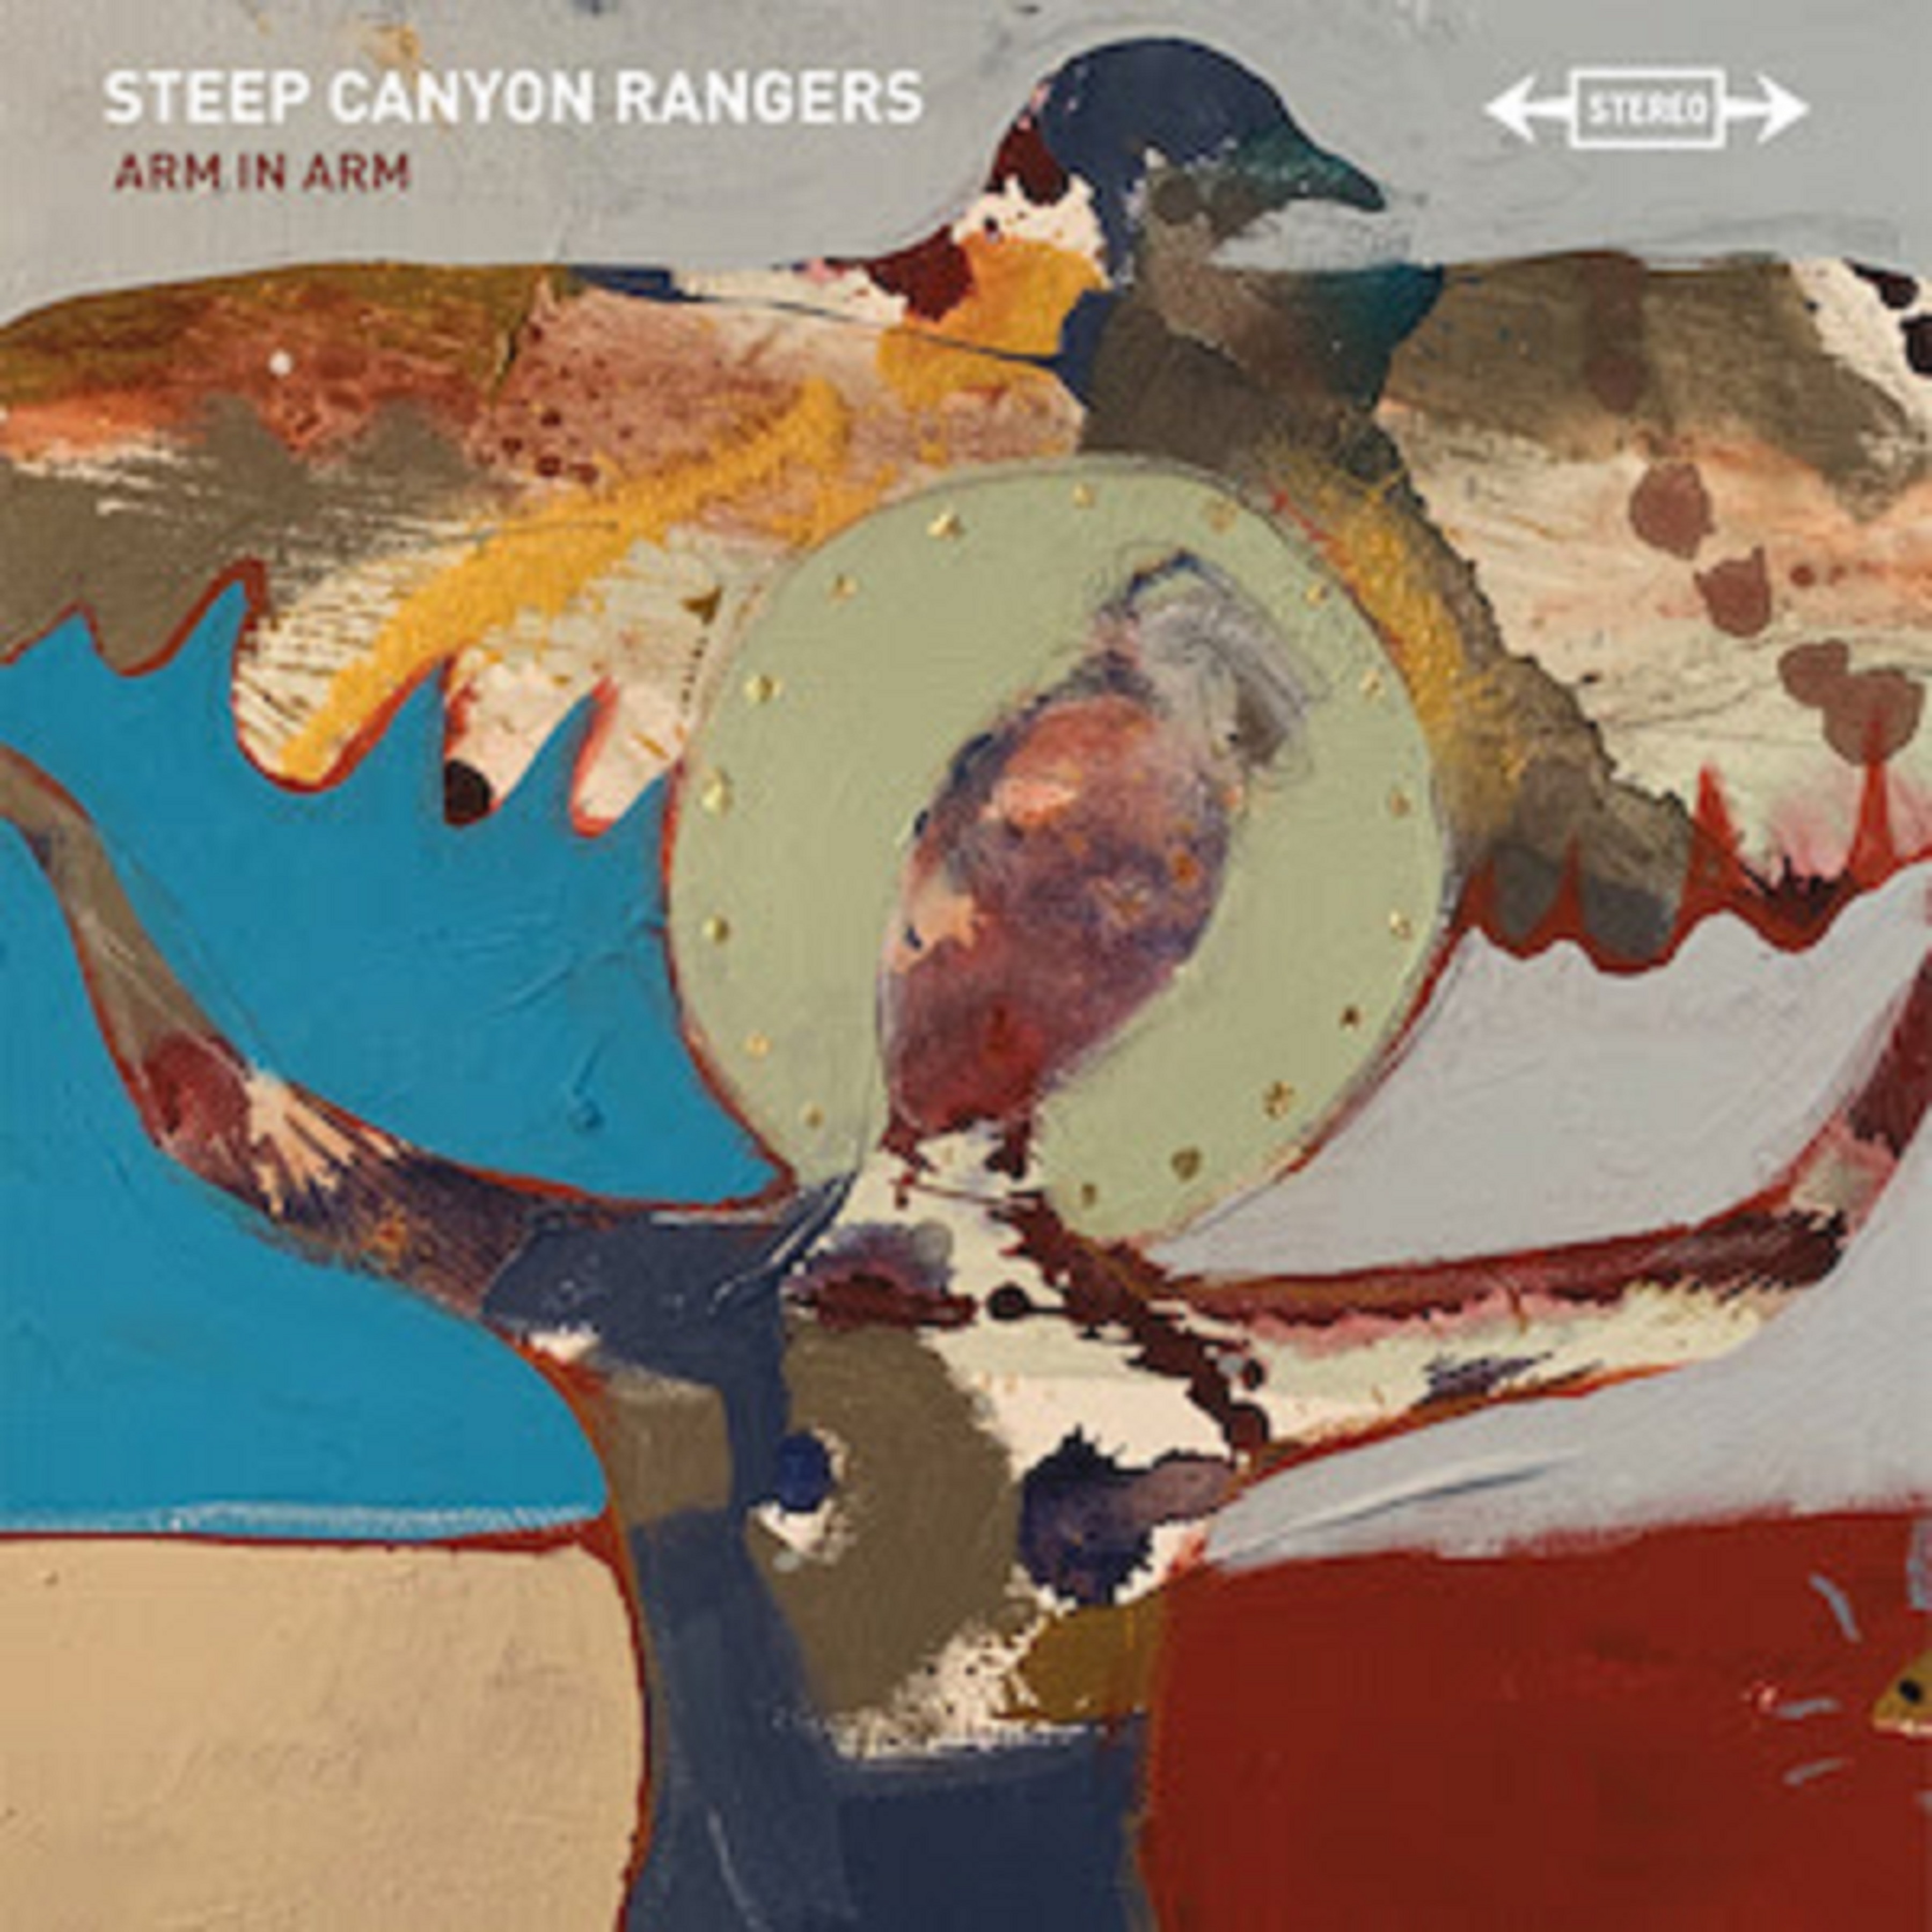 Steep Canyon Rangers’ New Album 'Arm In Arm' Out Today